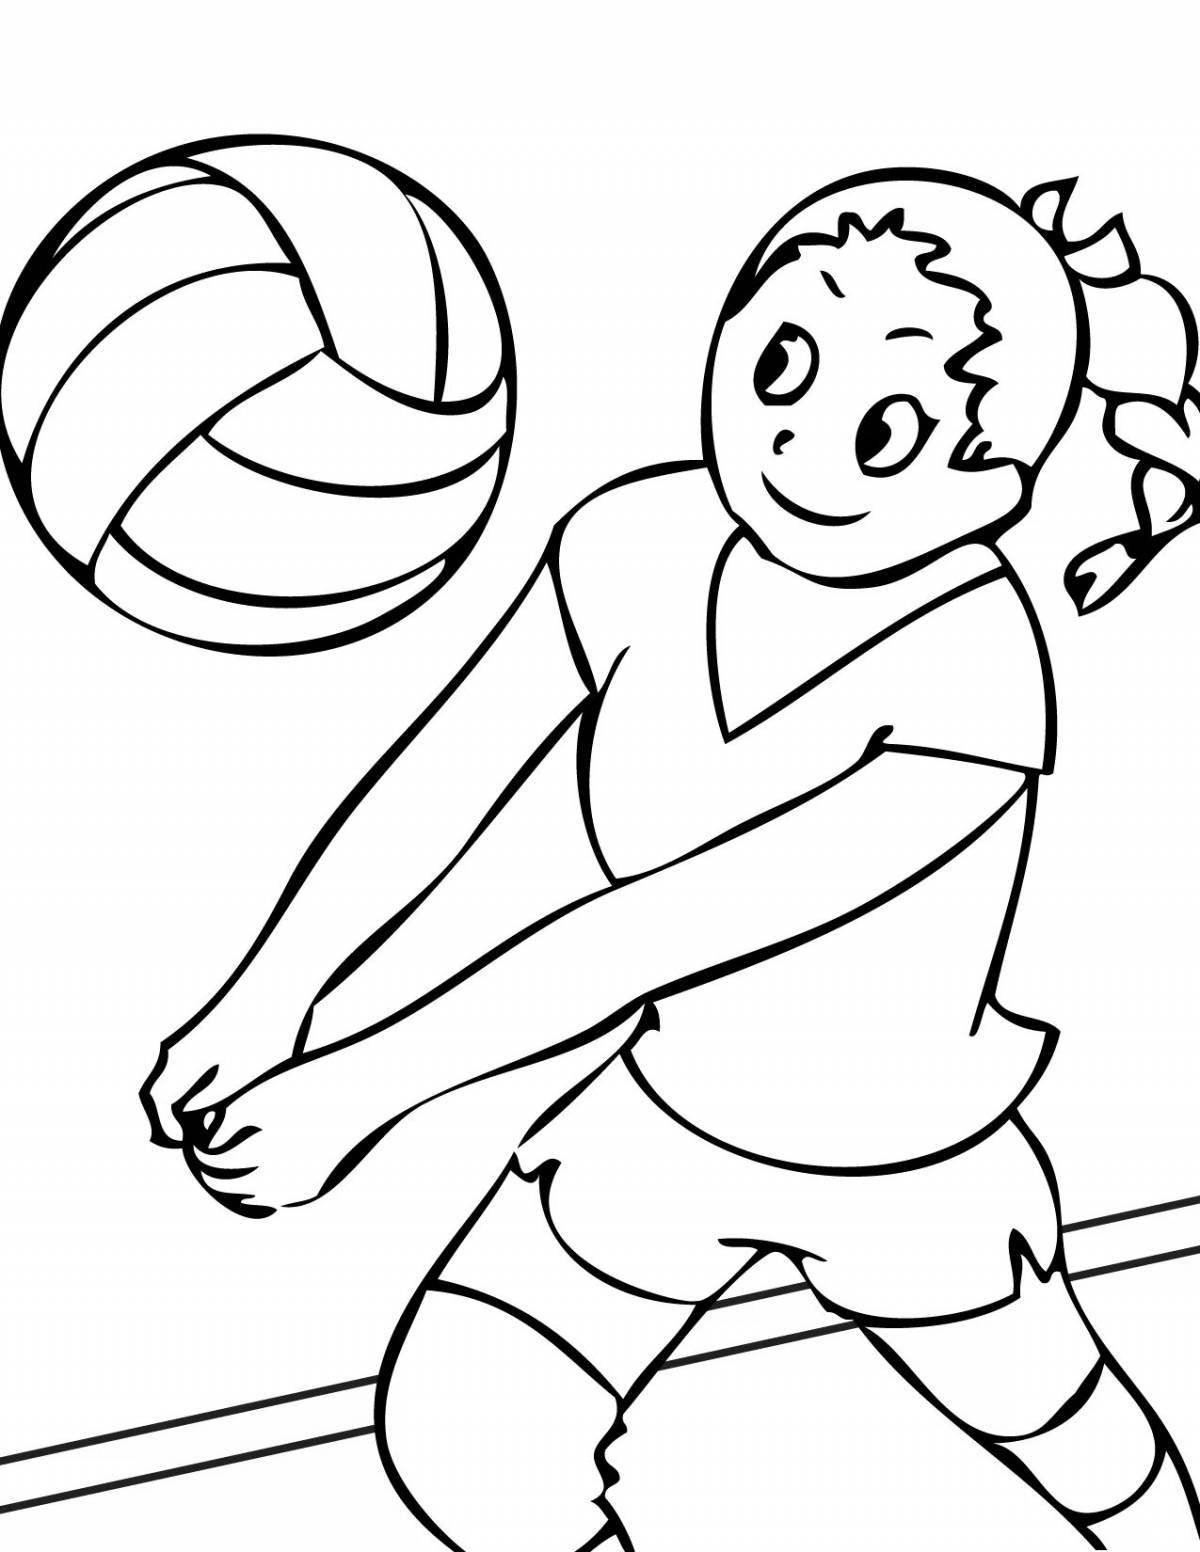 Coloring book for physical education Grade 1